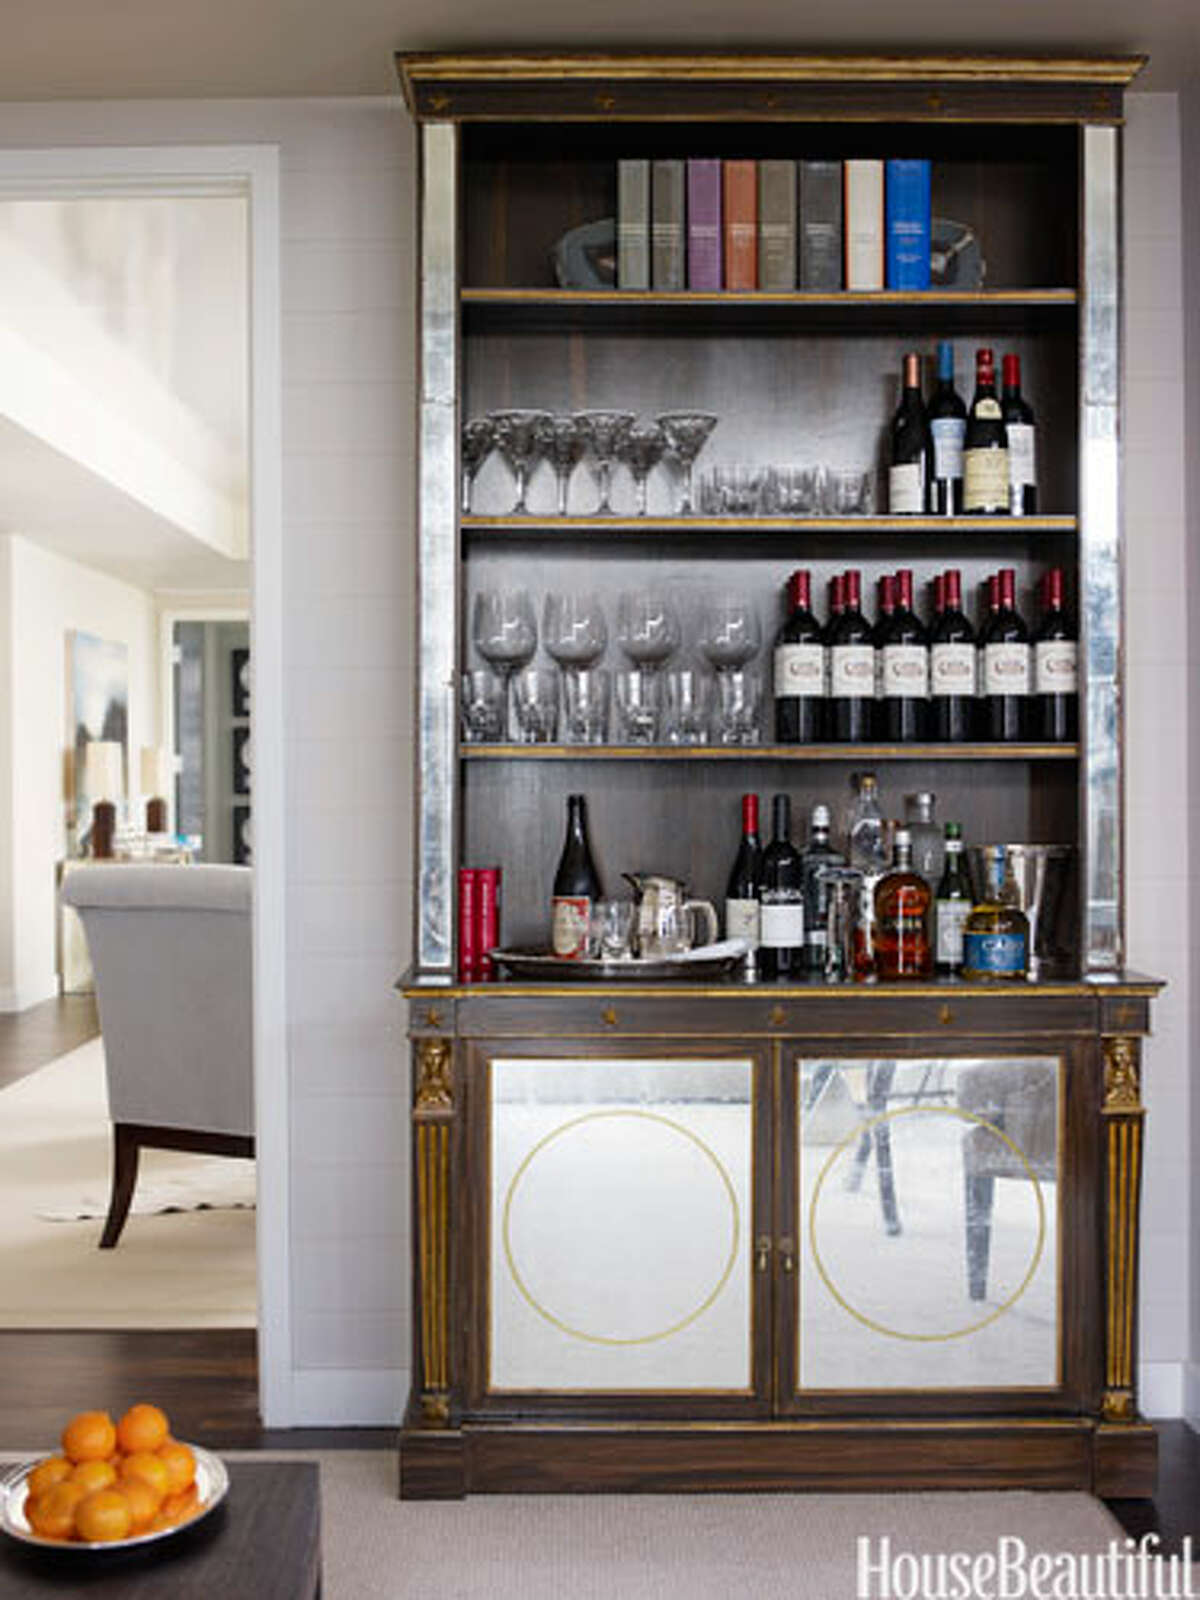 Bookcase Bar An antique bookcase doubles as a bar in this Manhattan apartment designed by Phoebe and Jim Howard. Glassware by William Yeoward Crystal.